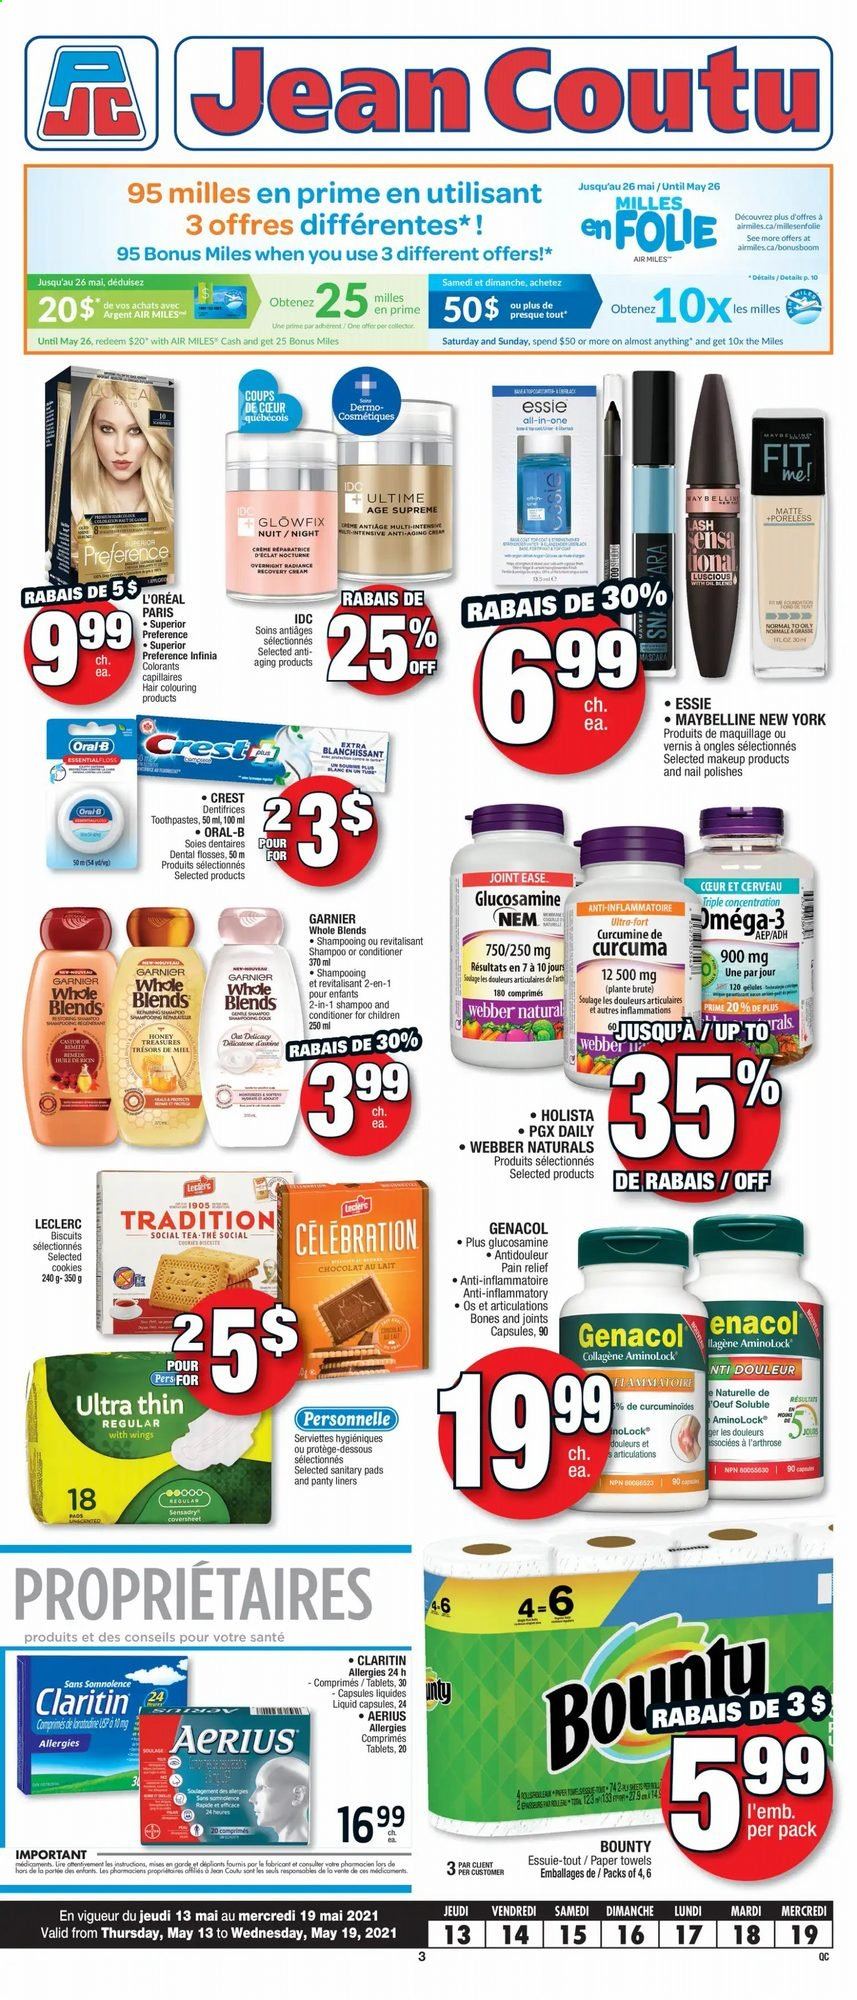 thumbnail - Jean Coutu Flyer - May 13, 2021 - May 19, 2021 - Sales products - cookies, Bounty, Celebration, tea, kitchen towels, paper towels, Crest, sanitary pads, L’Oréal, conditioner, Eclat, makeup, pain relief, Omega-3, Garnier, Maybelline, shampoo, Oral-B. Page 1.